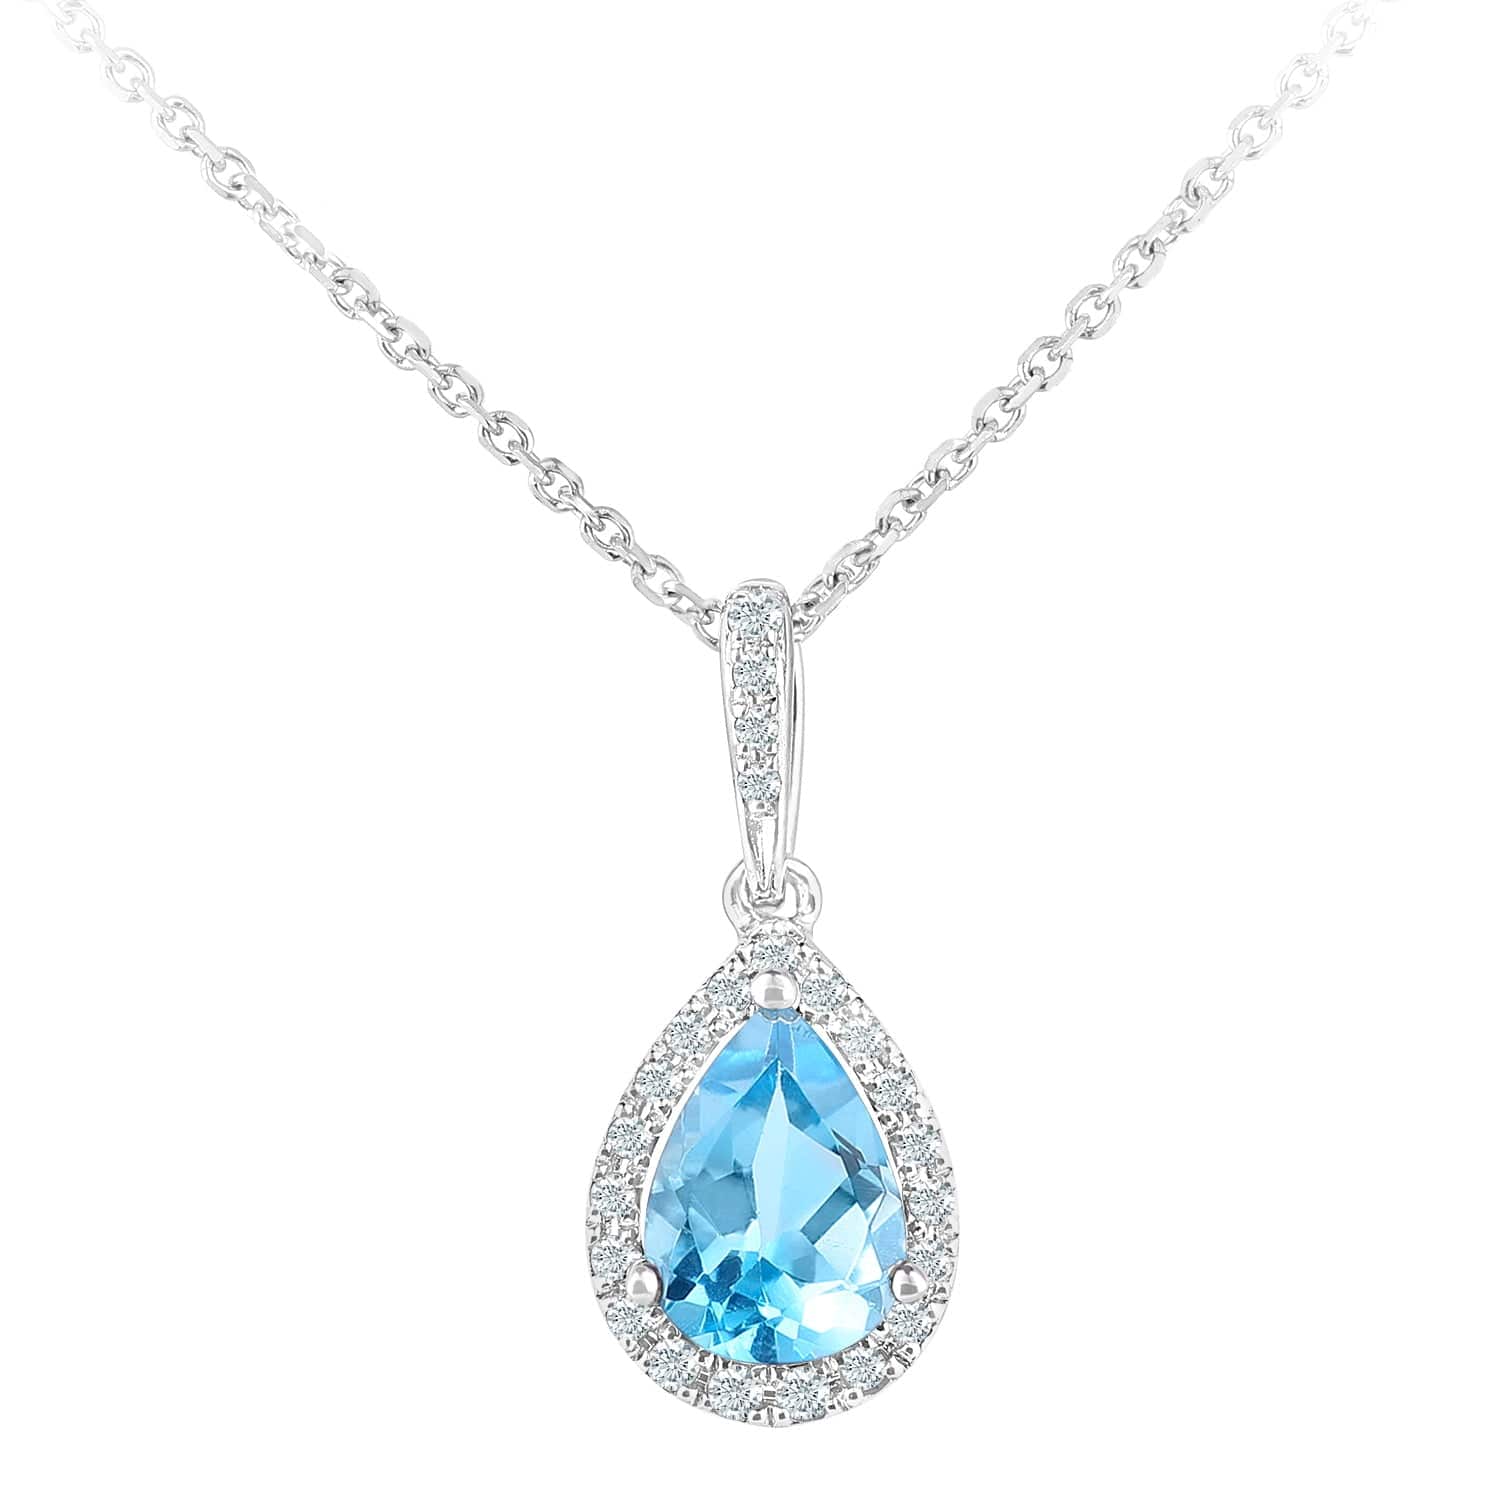 Lynora Luxe Pendant White Gold 9ct / Blue Topaz 9ct White Gold Blue Topaz and Diamond Teardrop Pendant Necklace